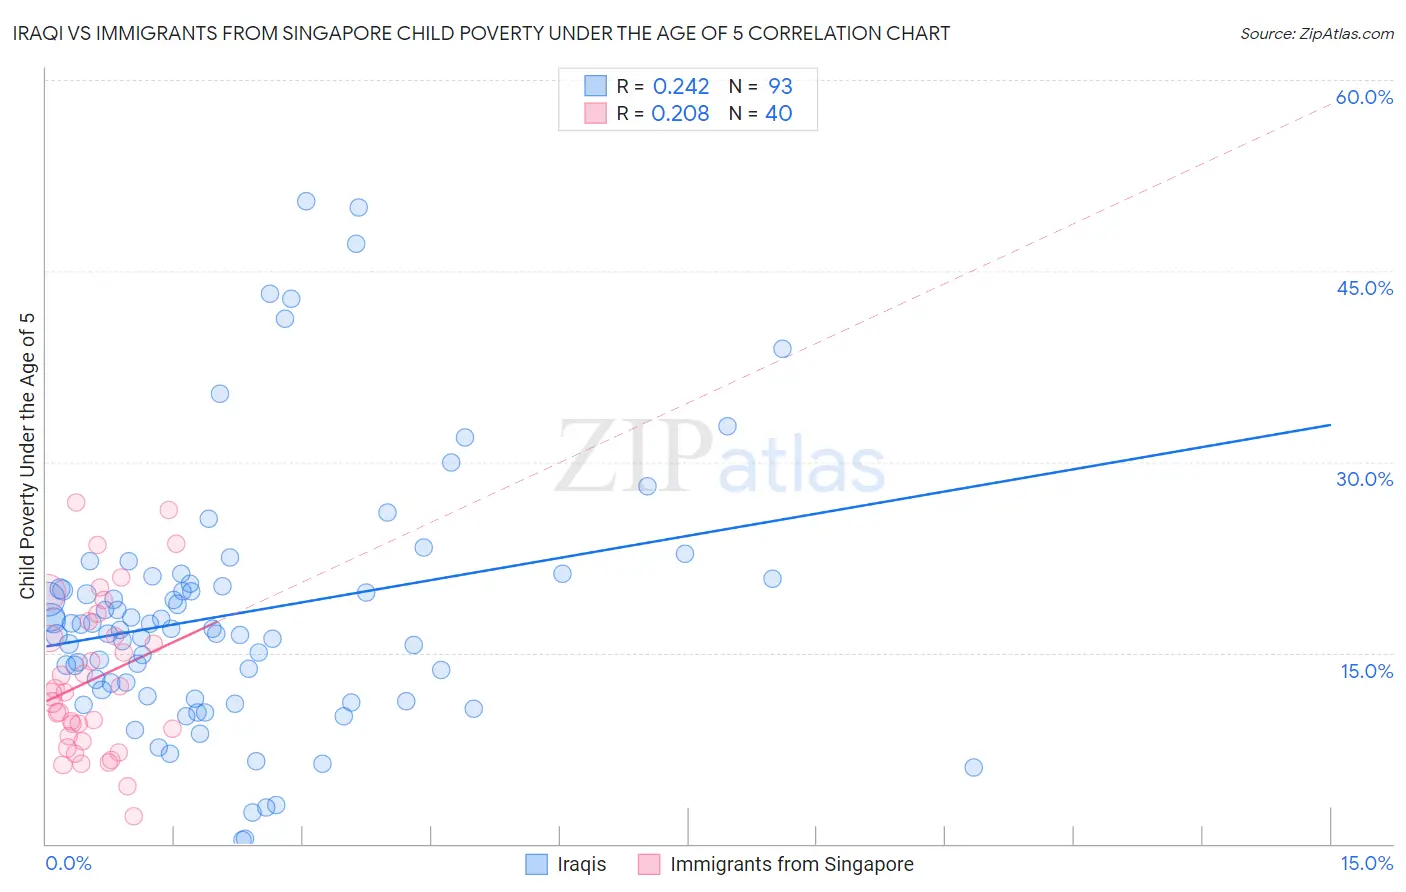 Iraqi vs Immigrants from Singapore Child Poverty Under the Age of 5